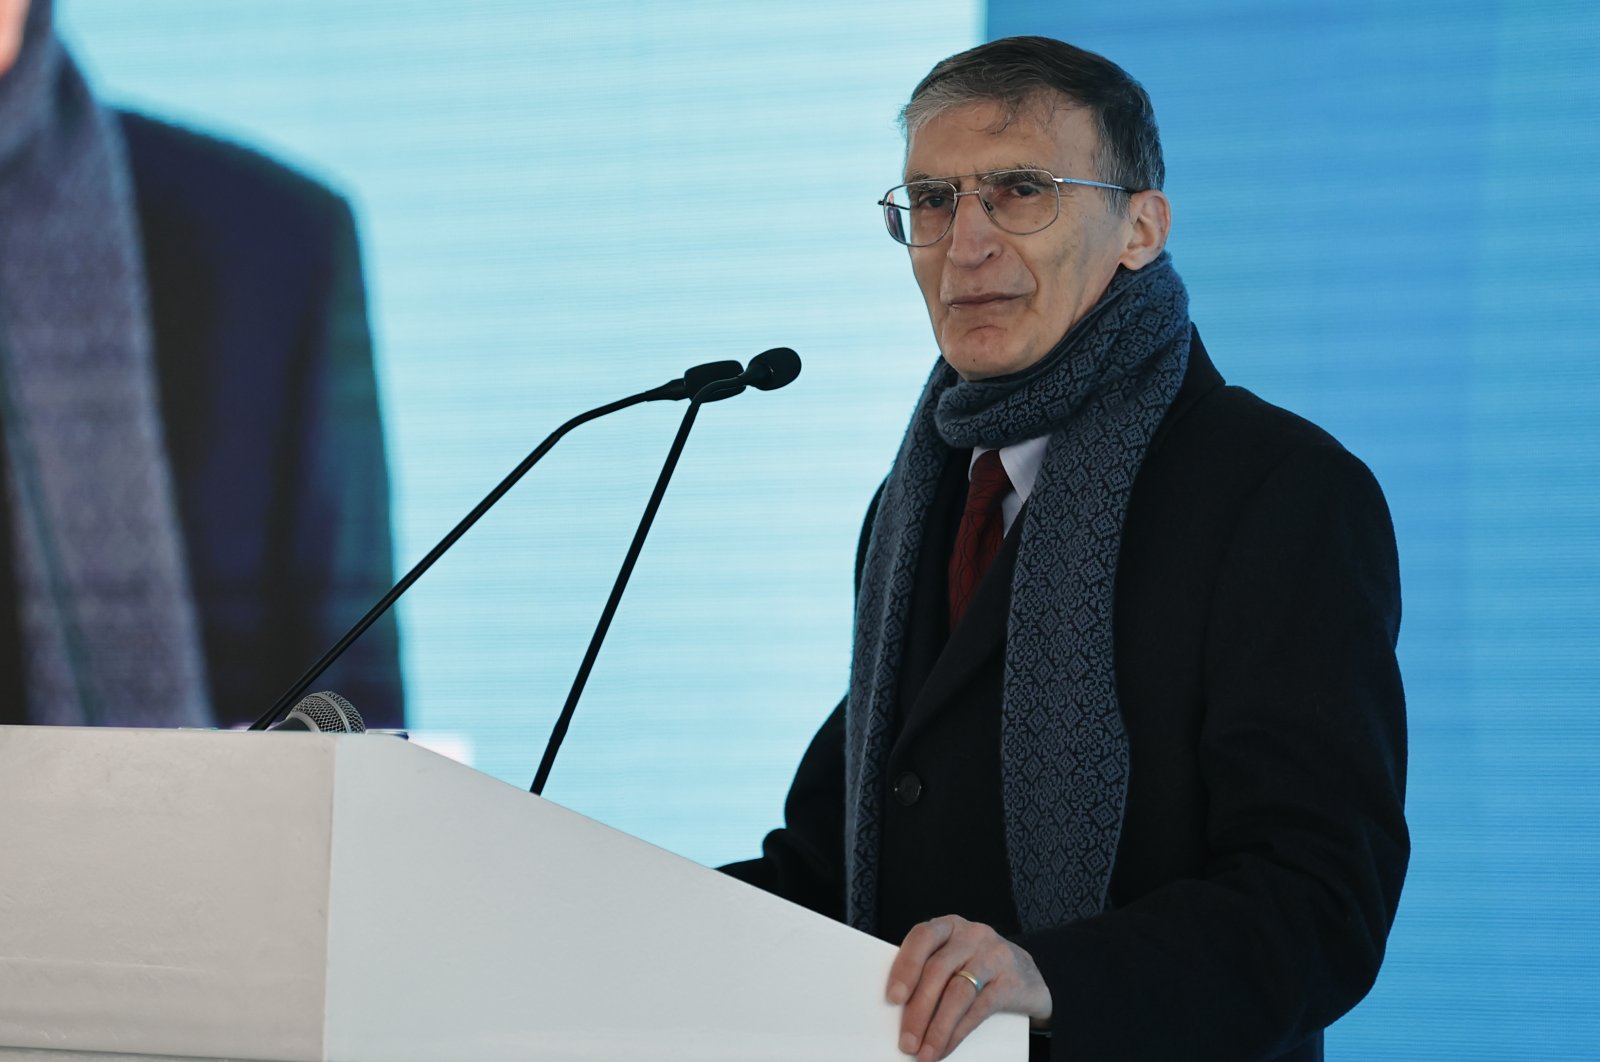 Professor Aziz Sancar speaks at the opening ceremony of the campus named after him in Ankara, Turkey, Feb. 17, 2022. (AA Photo)